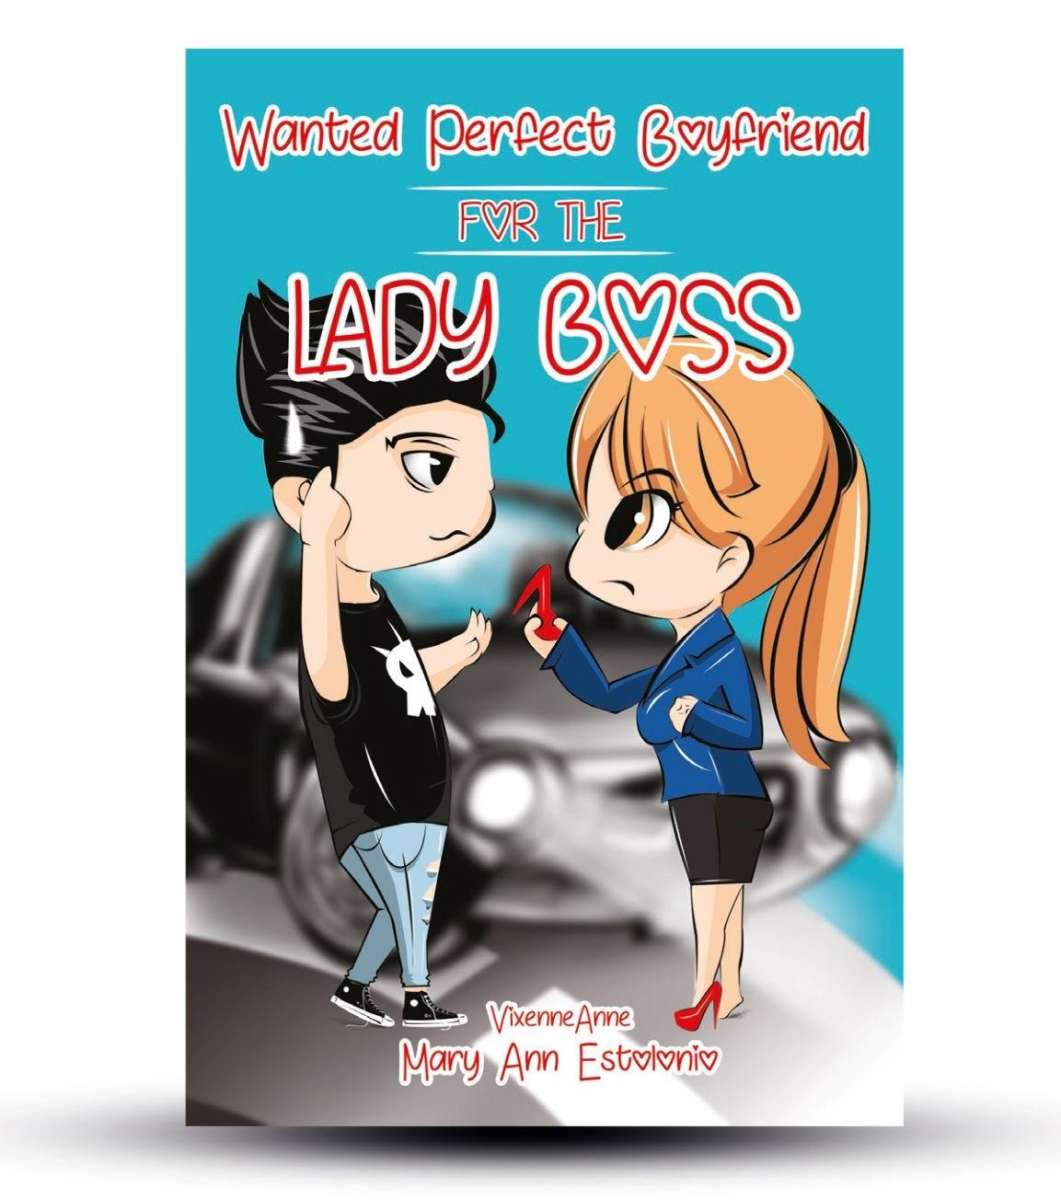 Wanted Perfect Boyfriend for the Lady Boss by Mary Ann Estolonio